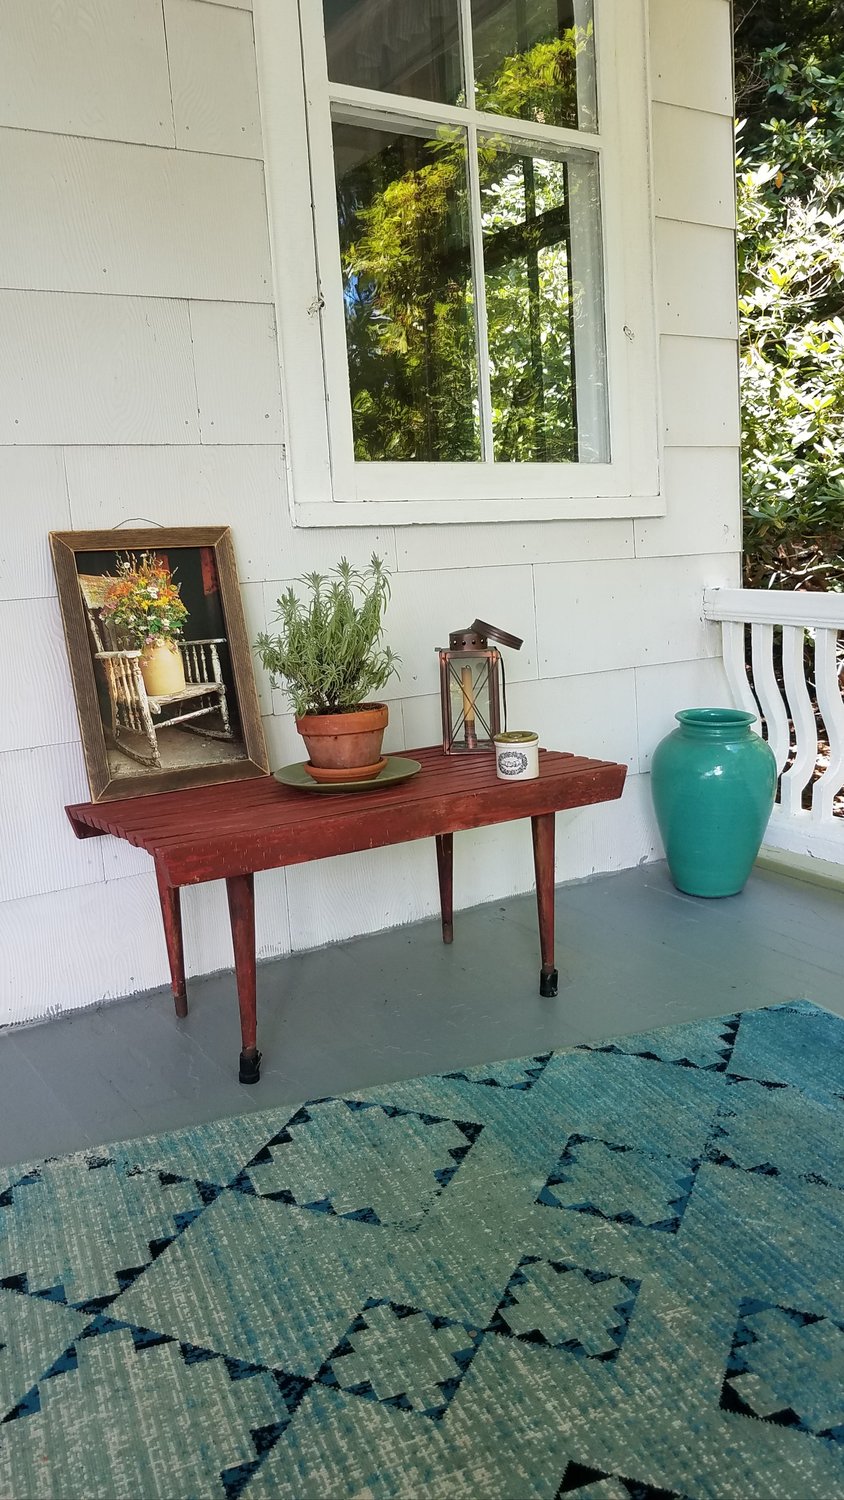 There is nothing fussy about this corner of the porch, which features painted wood floorboards, an indoor/outdoor area rug and a rust-colored vintage slatted-wood table. These decorating elements, combined with simple accessories, come together to create a casual country air...